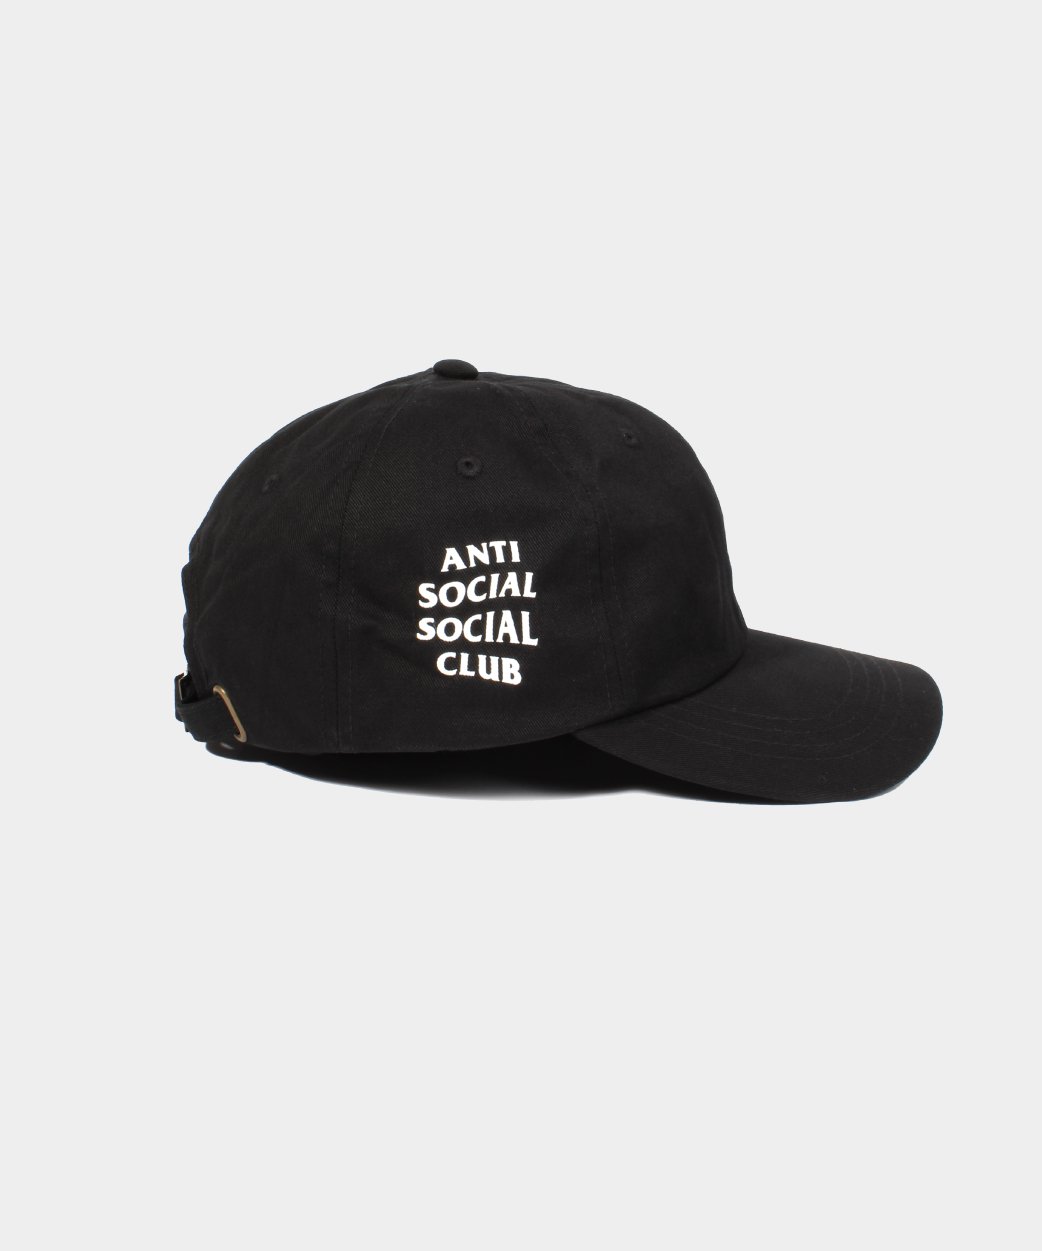 SALE 40% OFF! <br>Anti Social Social Club ASSCアンチソーシャルソーシャルクラブ<br> Weird Cap Black/キャップ<img class='new_mark_img2' src='https://img.shop-pro.jp/img/new/icons20.gif' style='border:none;display:inline;margin:0px;padding:0px;width:auto;' />